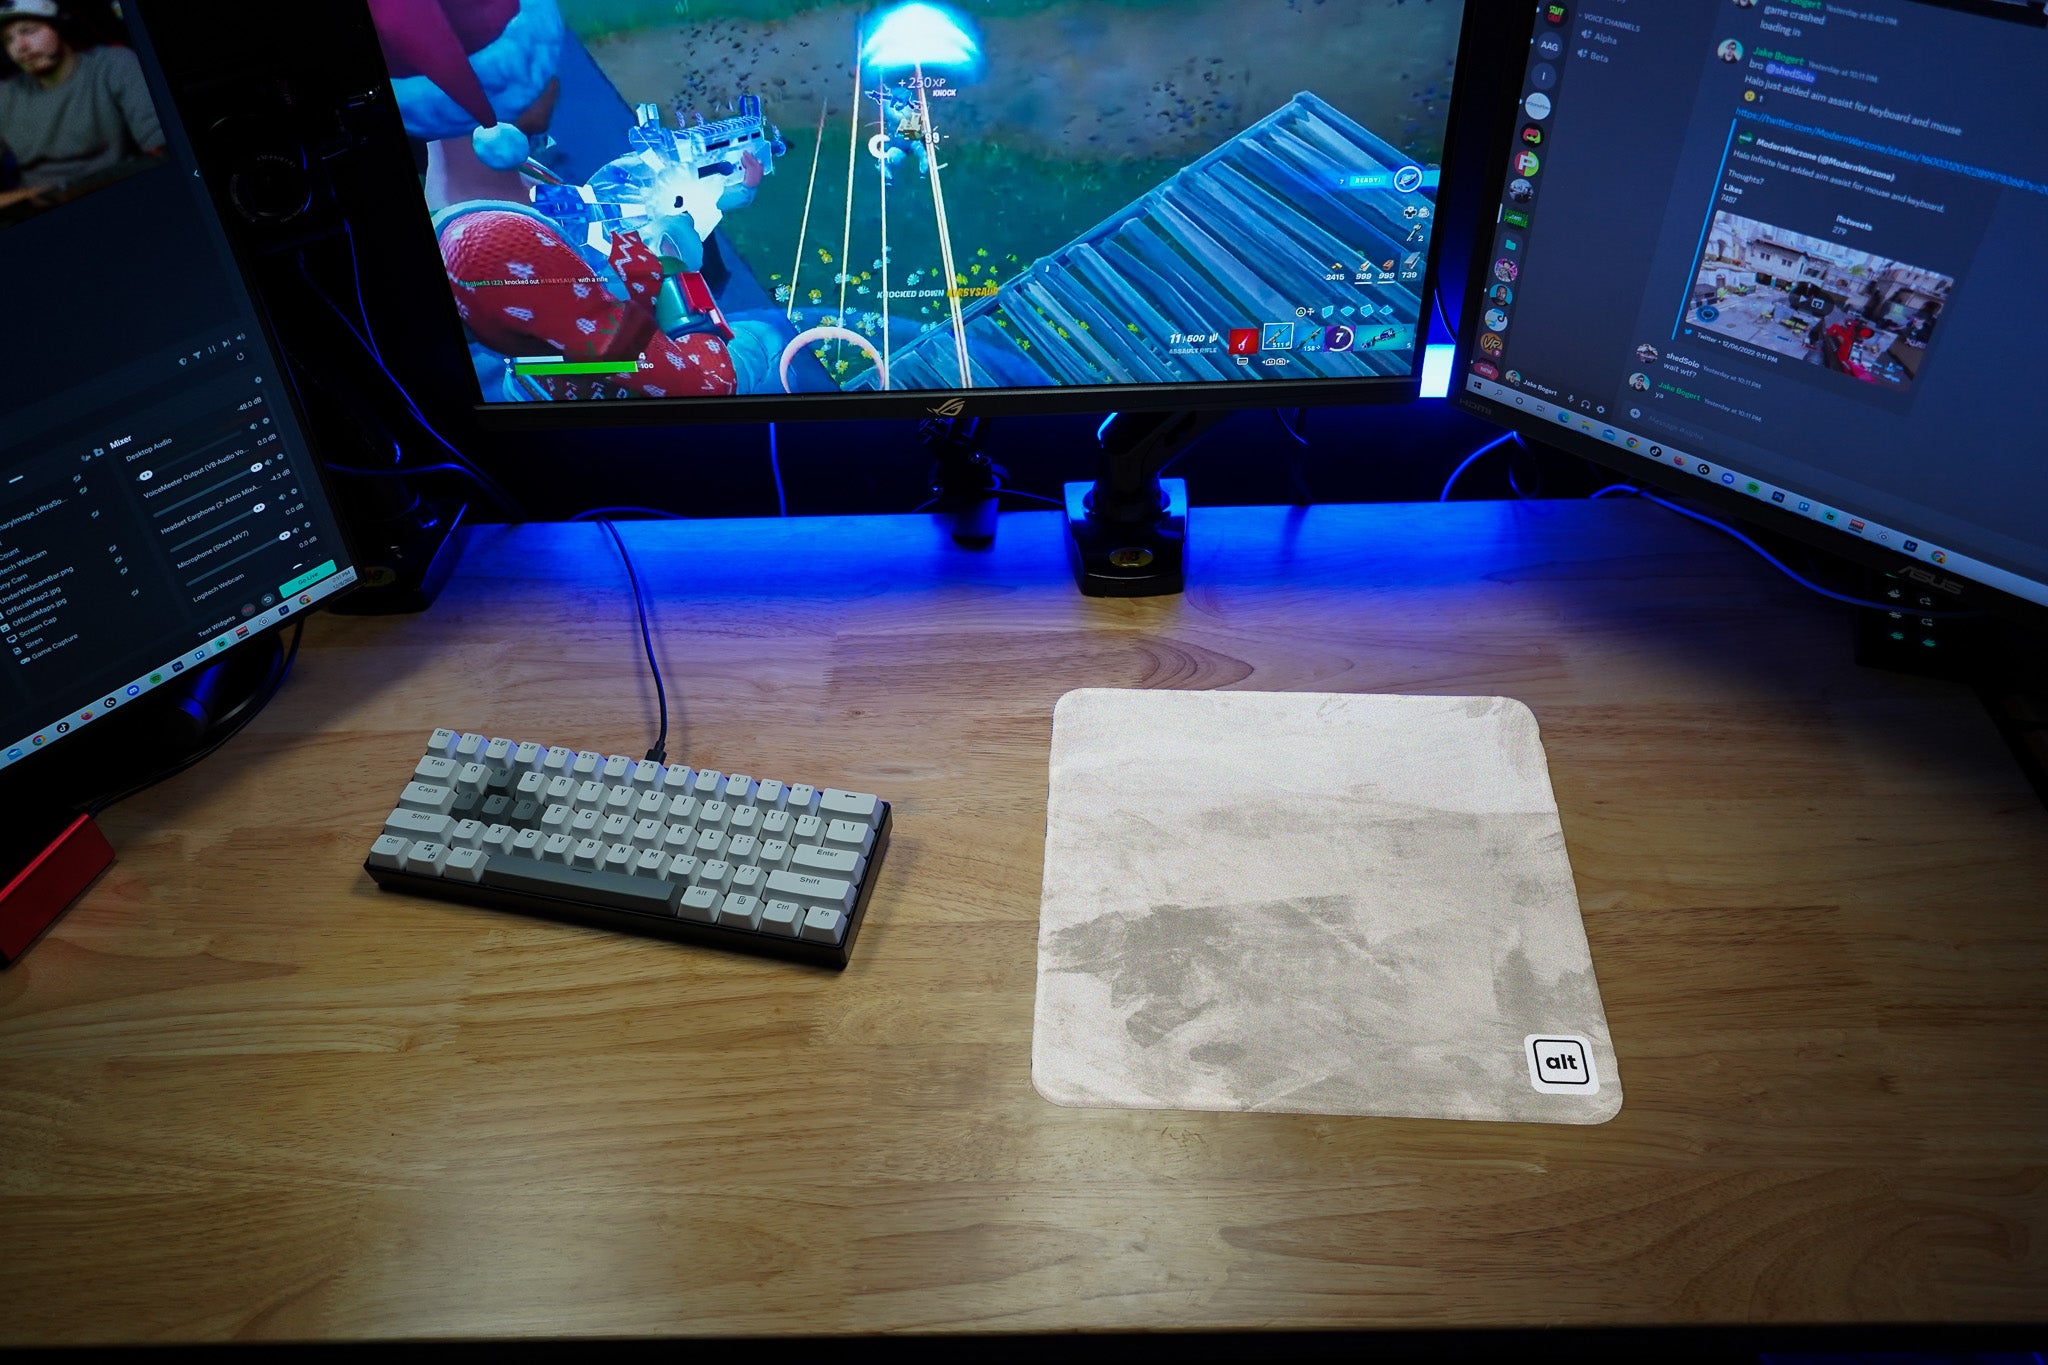 Tranquility Mousepad